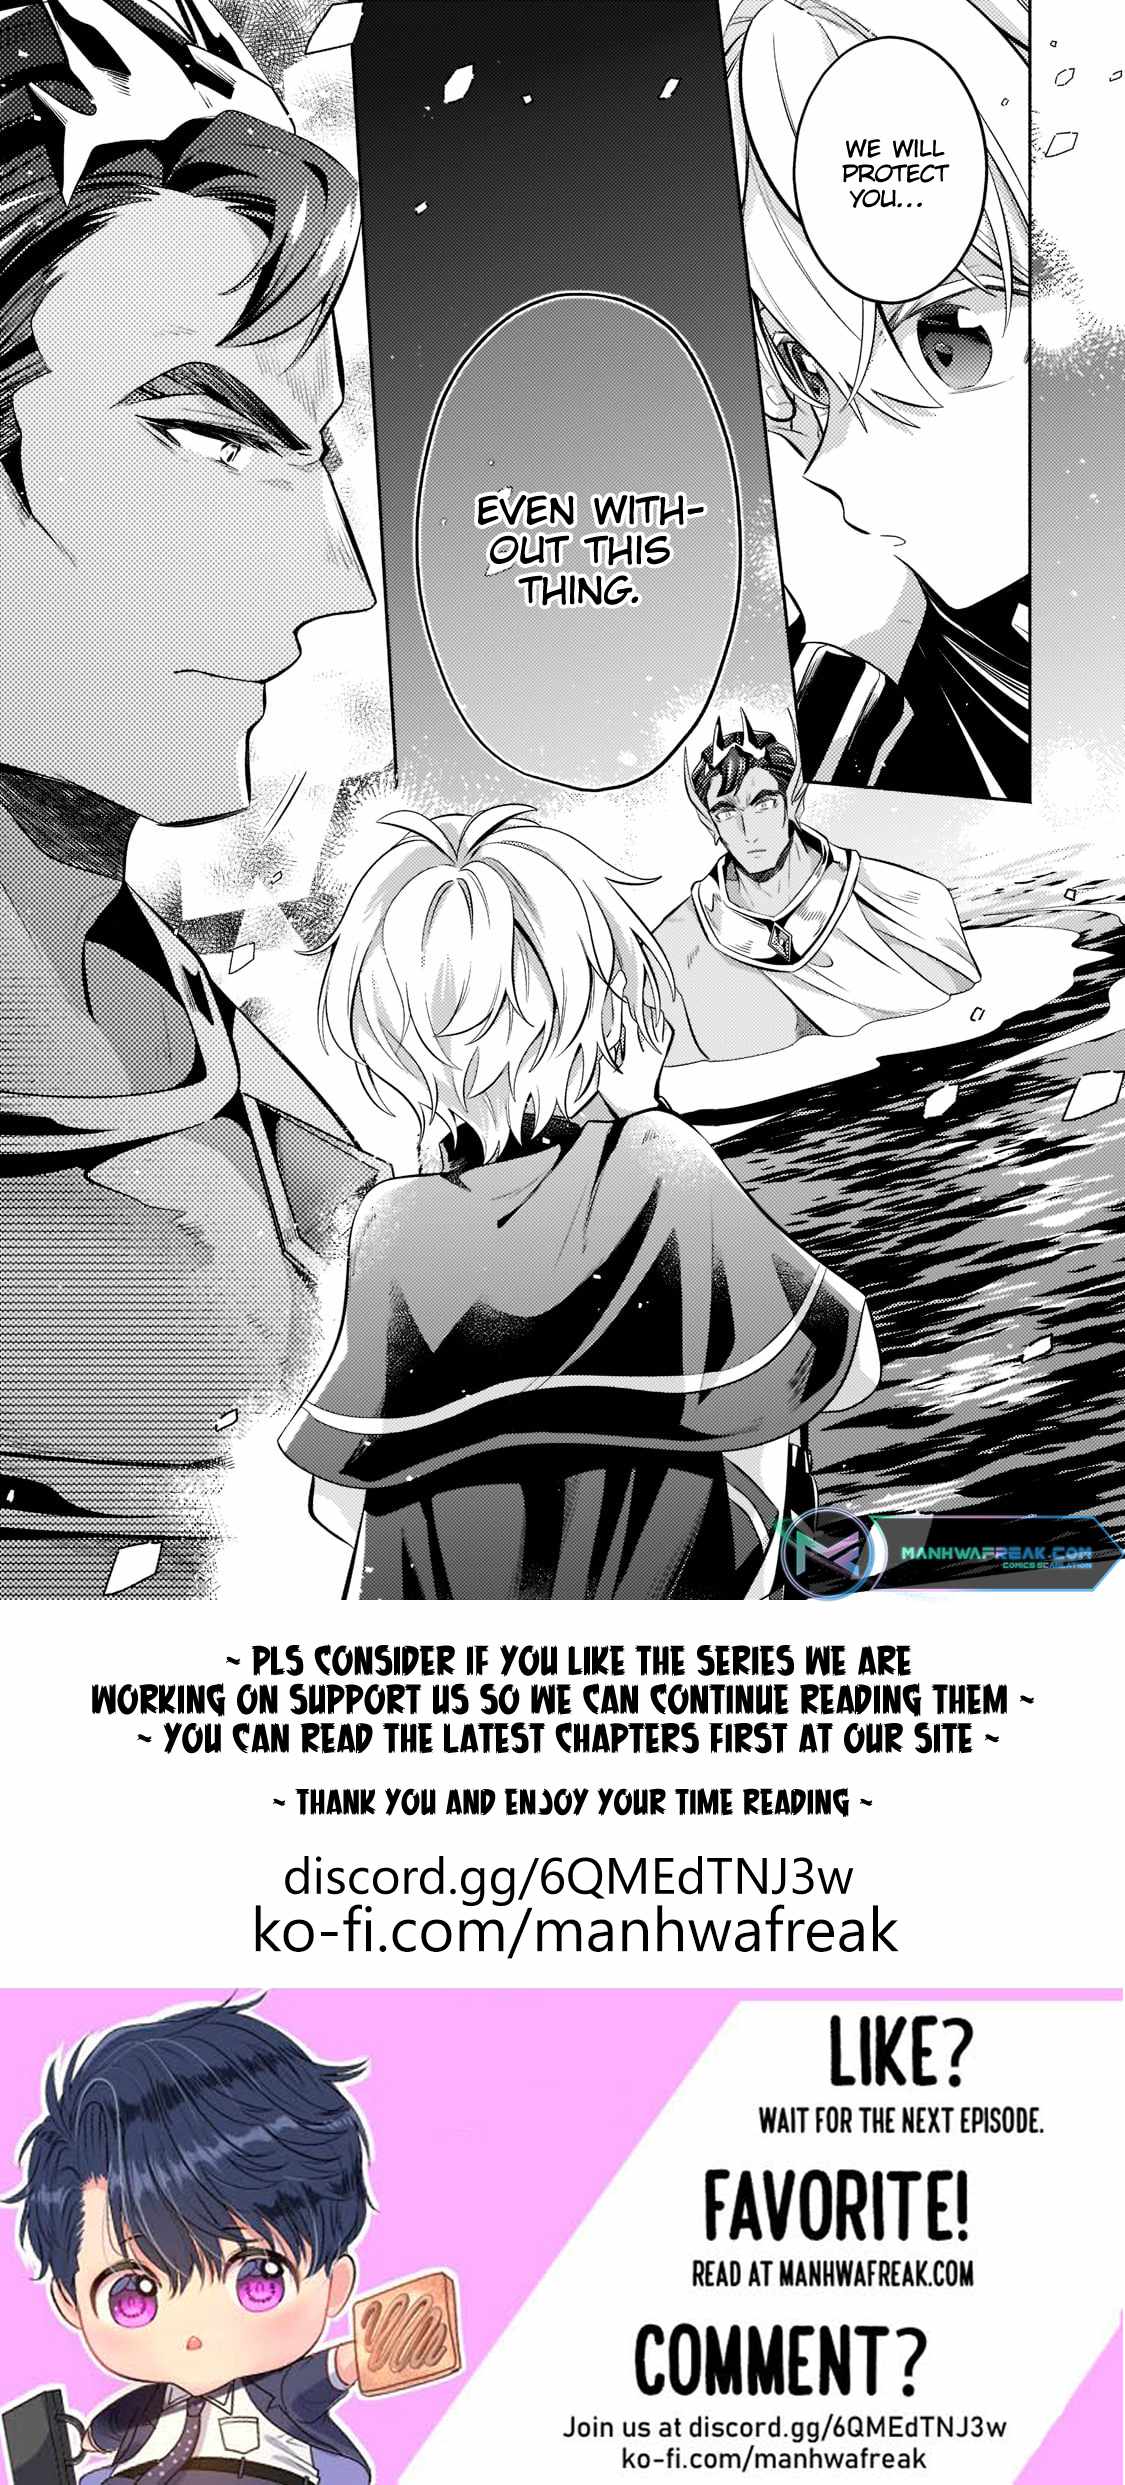 Fun Territory Defense by the Optimistic Lord Chapter 15-2-eng-li - Page 10